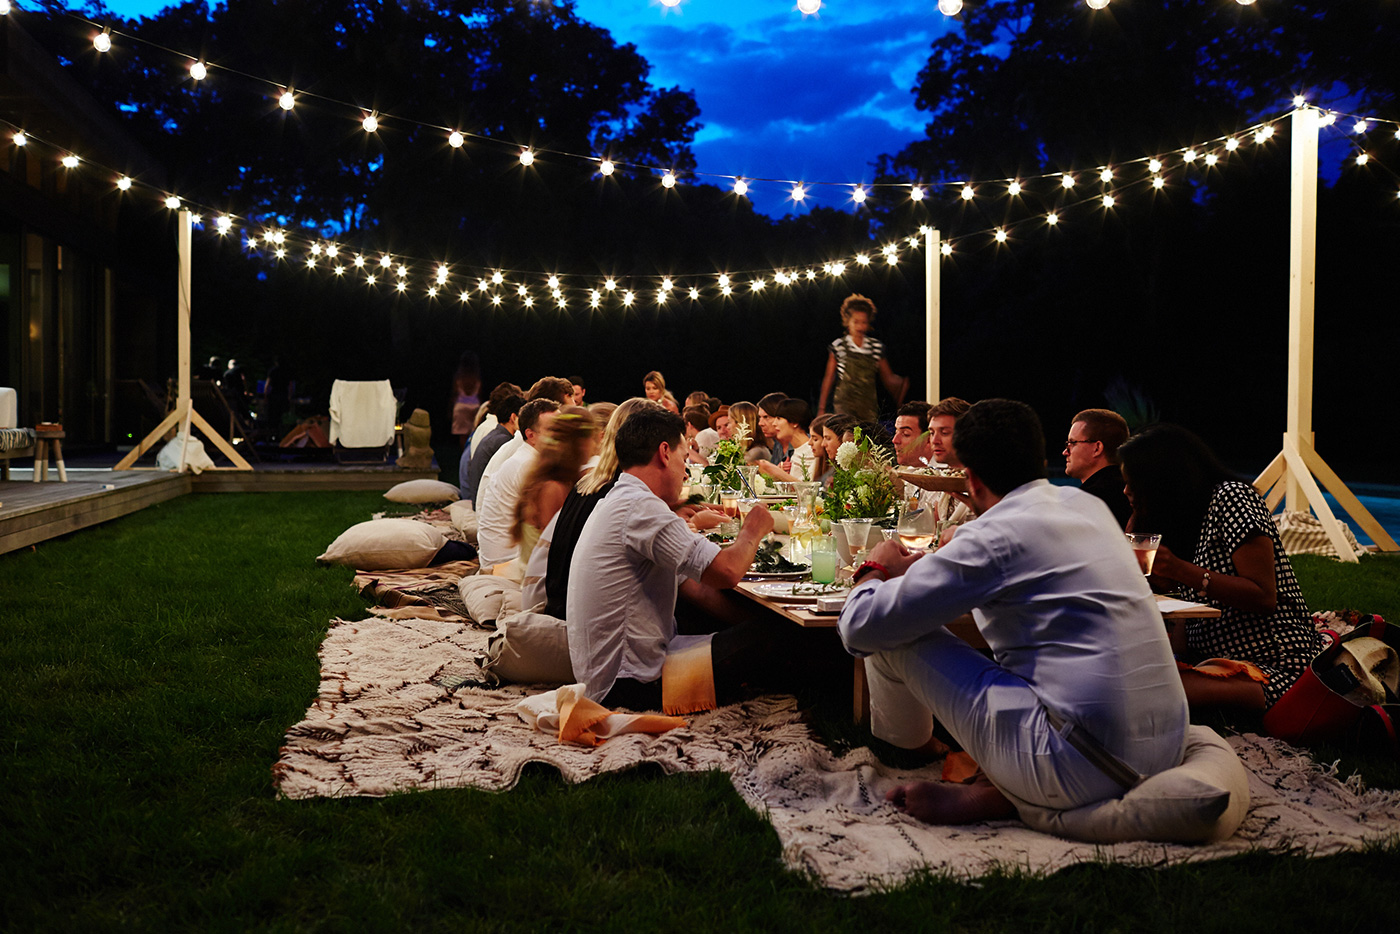 cointreau_la_maison_bar_amagansett_summer_evening_dinner_party_cocktails_entertaining_inspiration_chef_jeff_schwarz_tablescape_outdoor_setting_flowers_herbs_rustic_moroccan_rugs_string_l.jpg